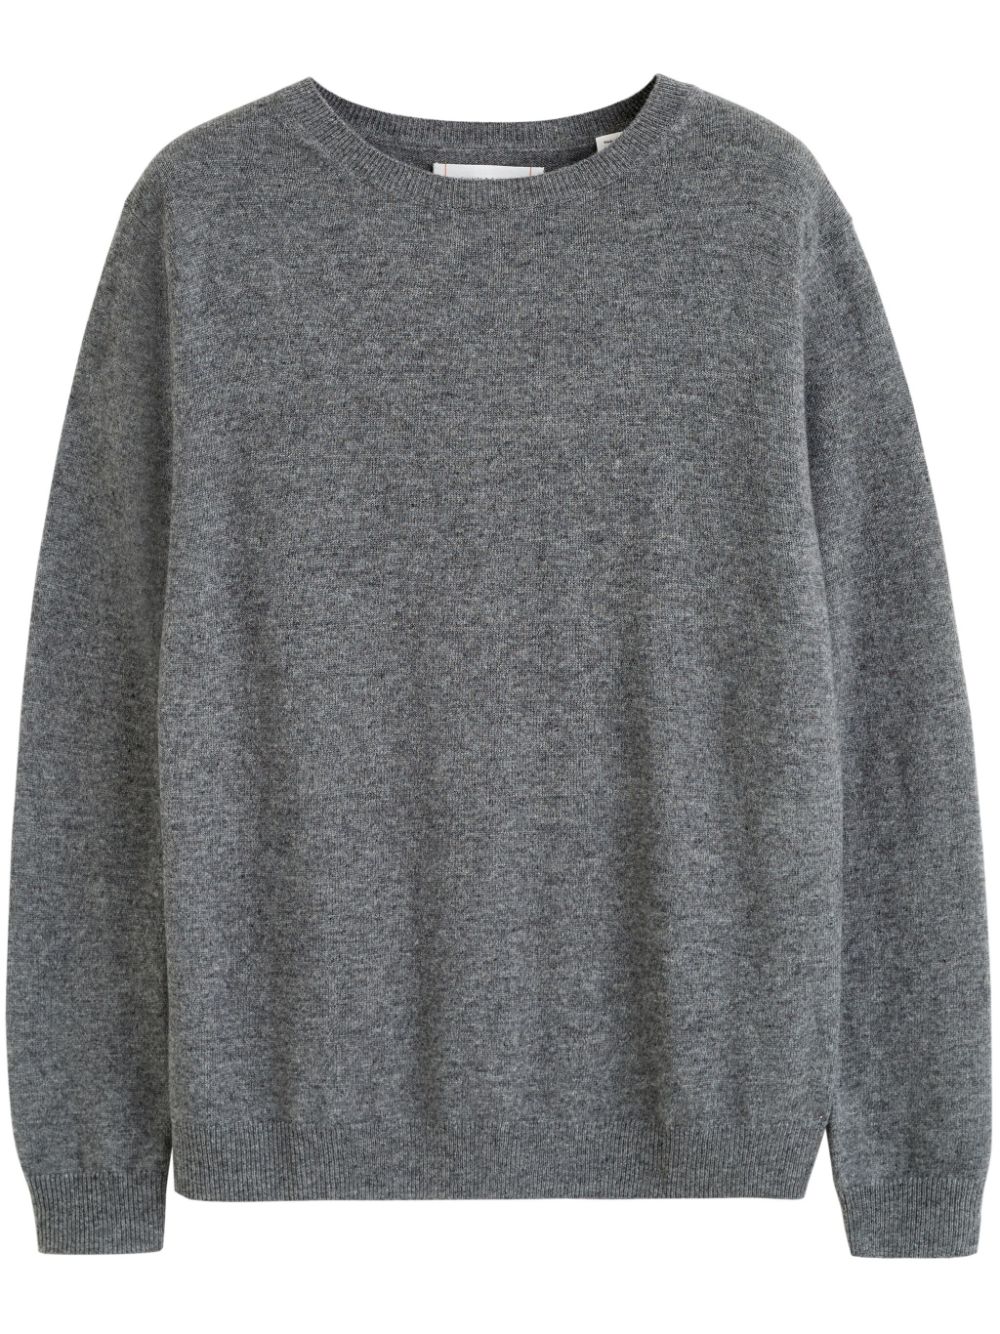 Chinti & Parker Heart Elbow-patch Jumper In Grey